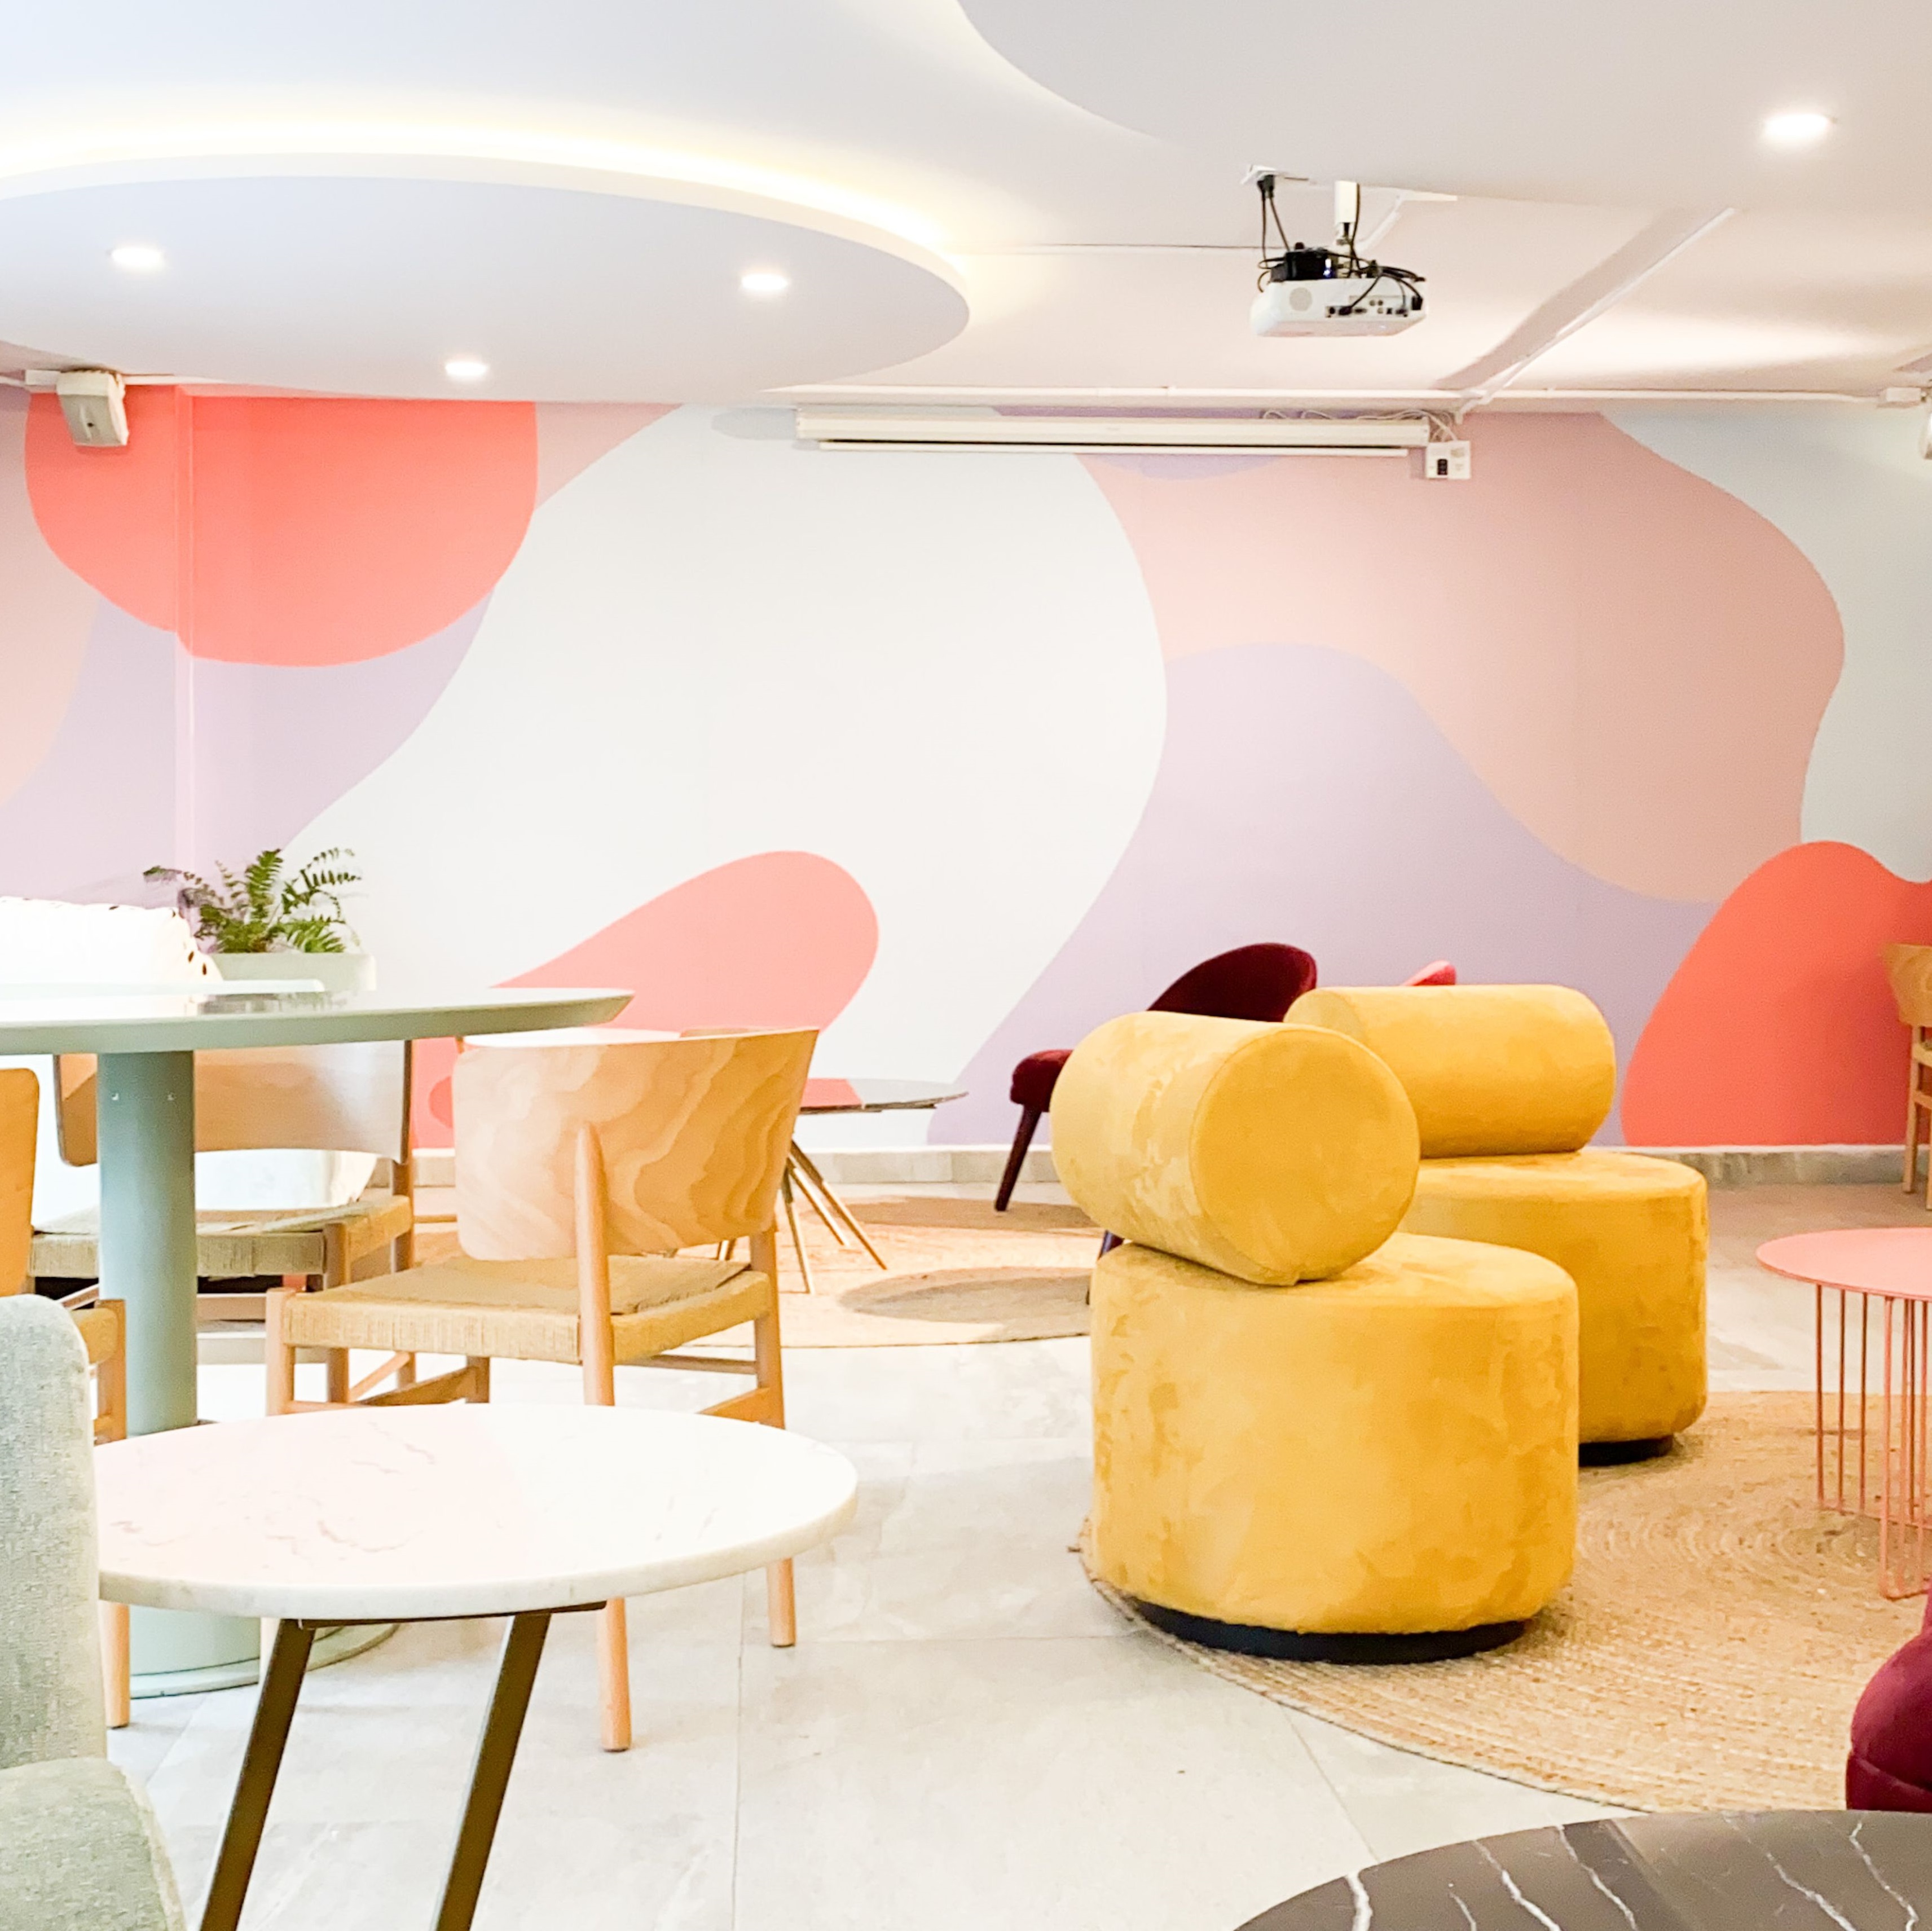 A colorful and quirky interior design for office